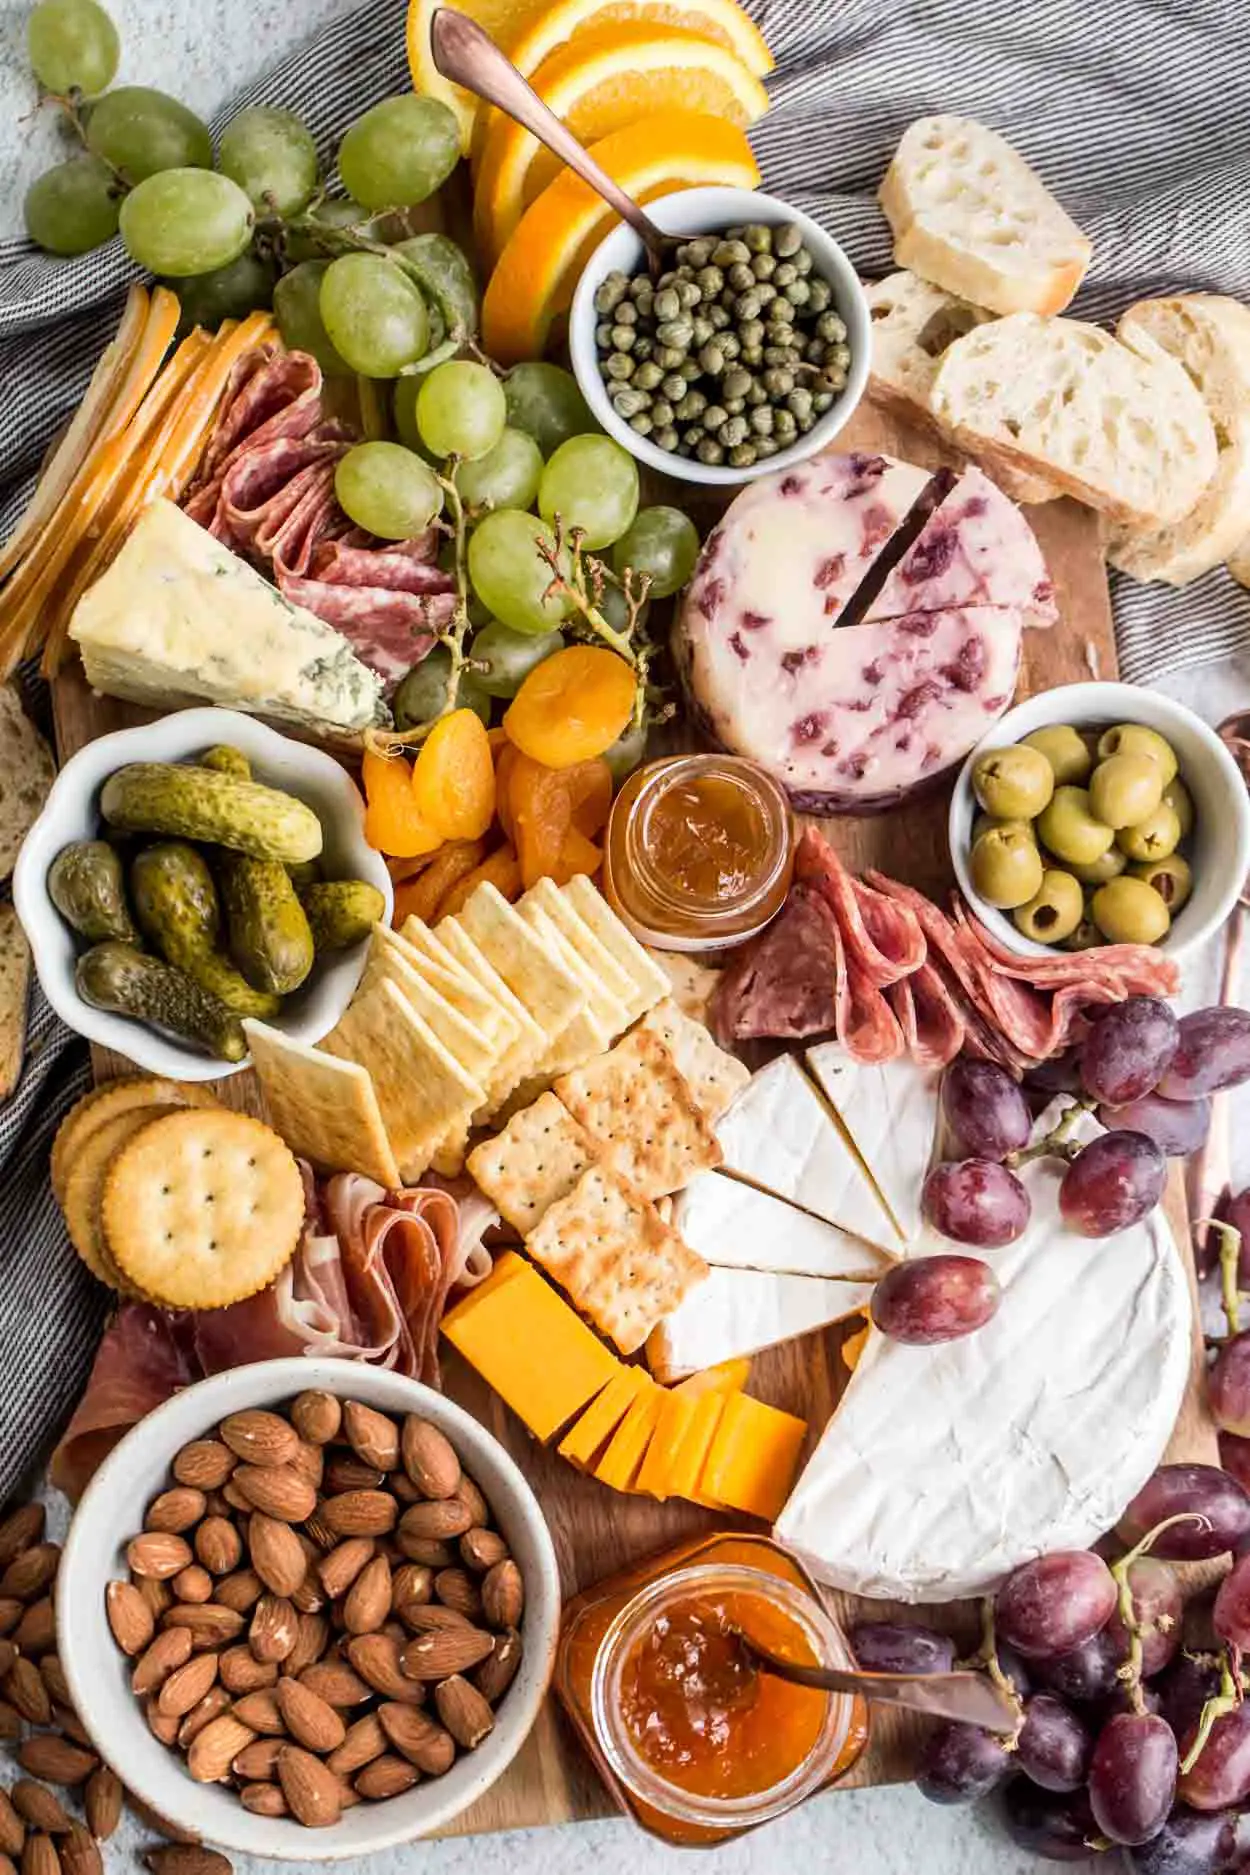 How to Make a Charcuterie Board (Cheese Board)